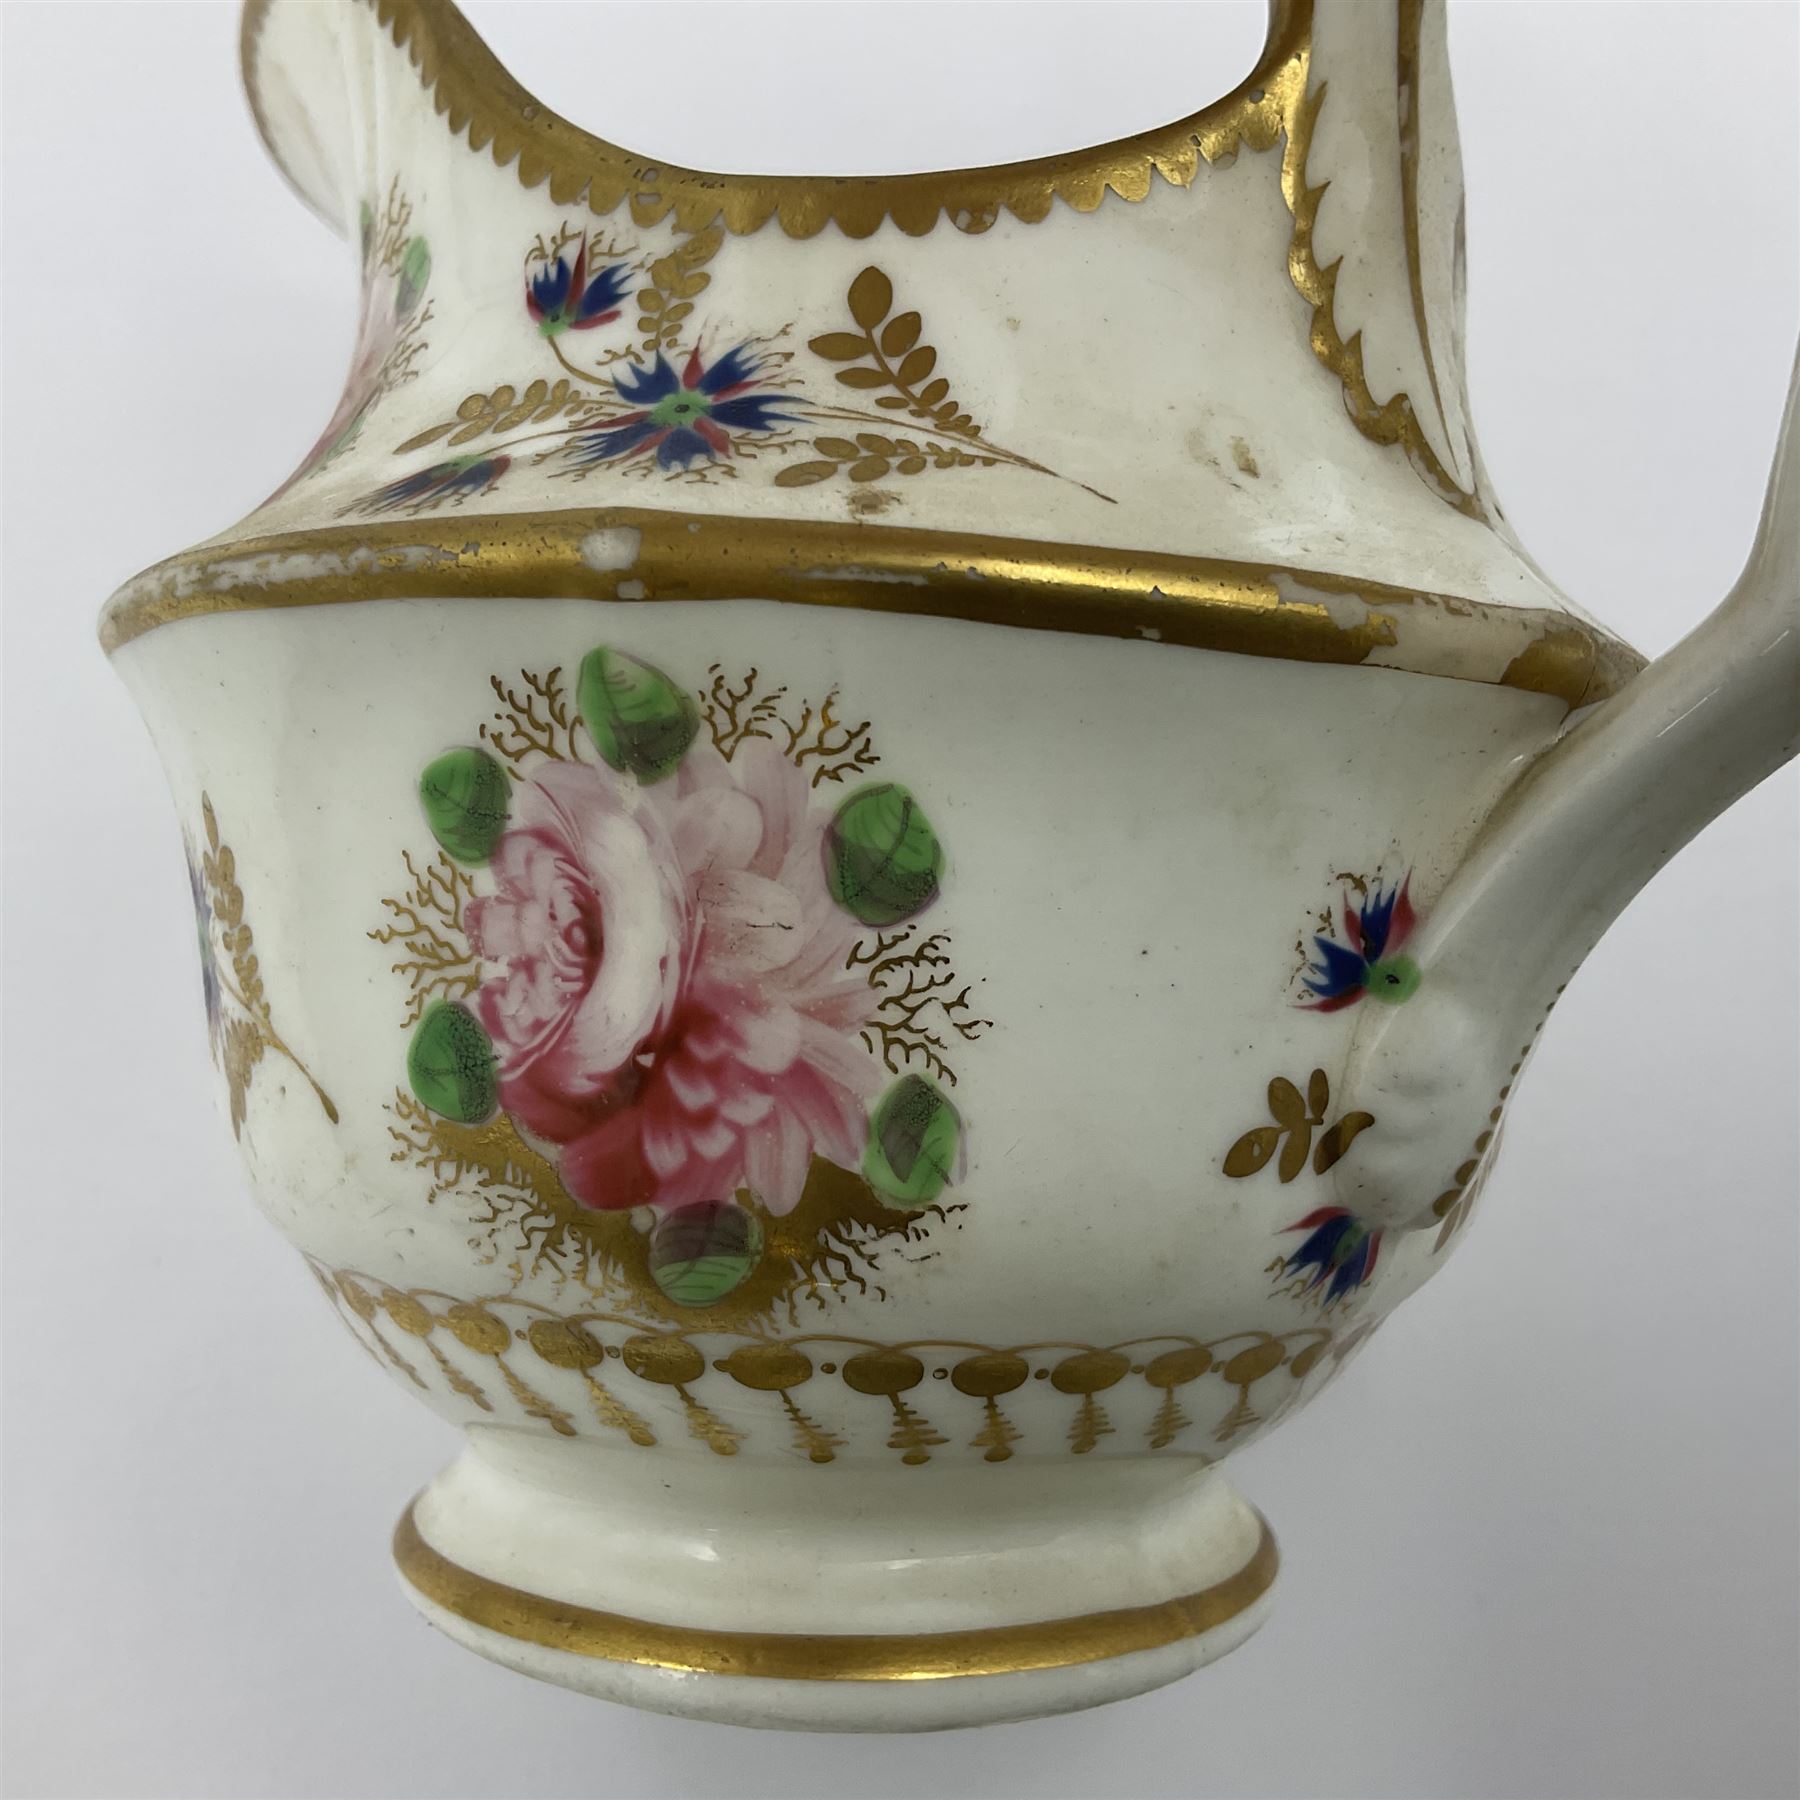 19th century Thomas Goode and Co jug - Image 21 of 22